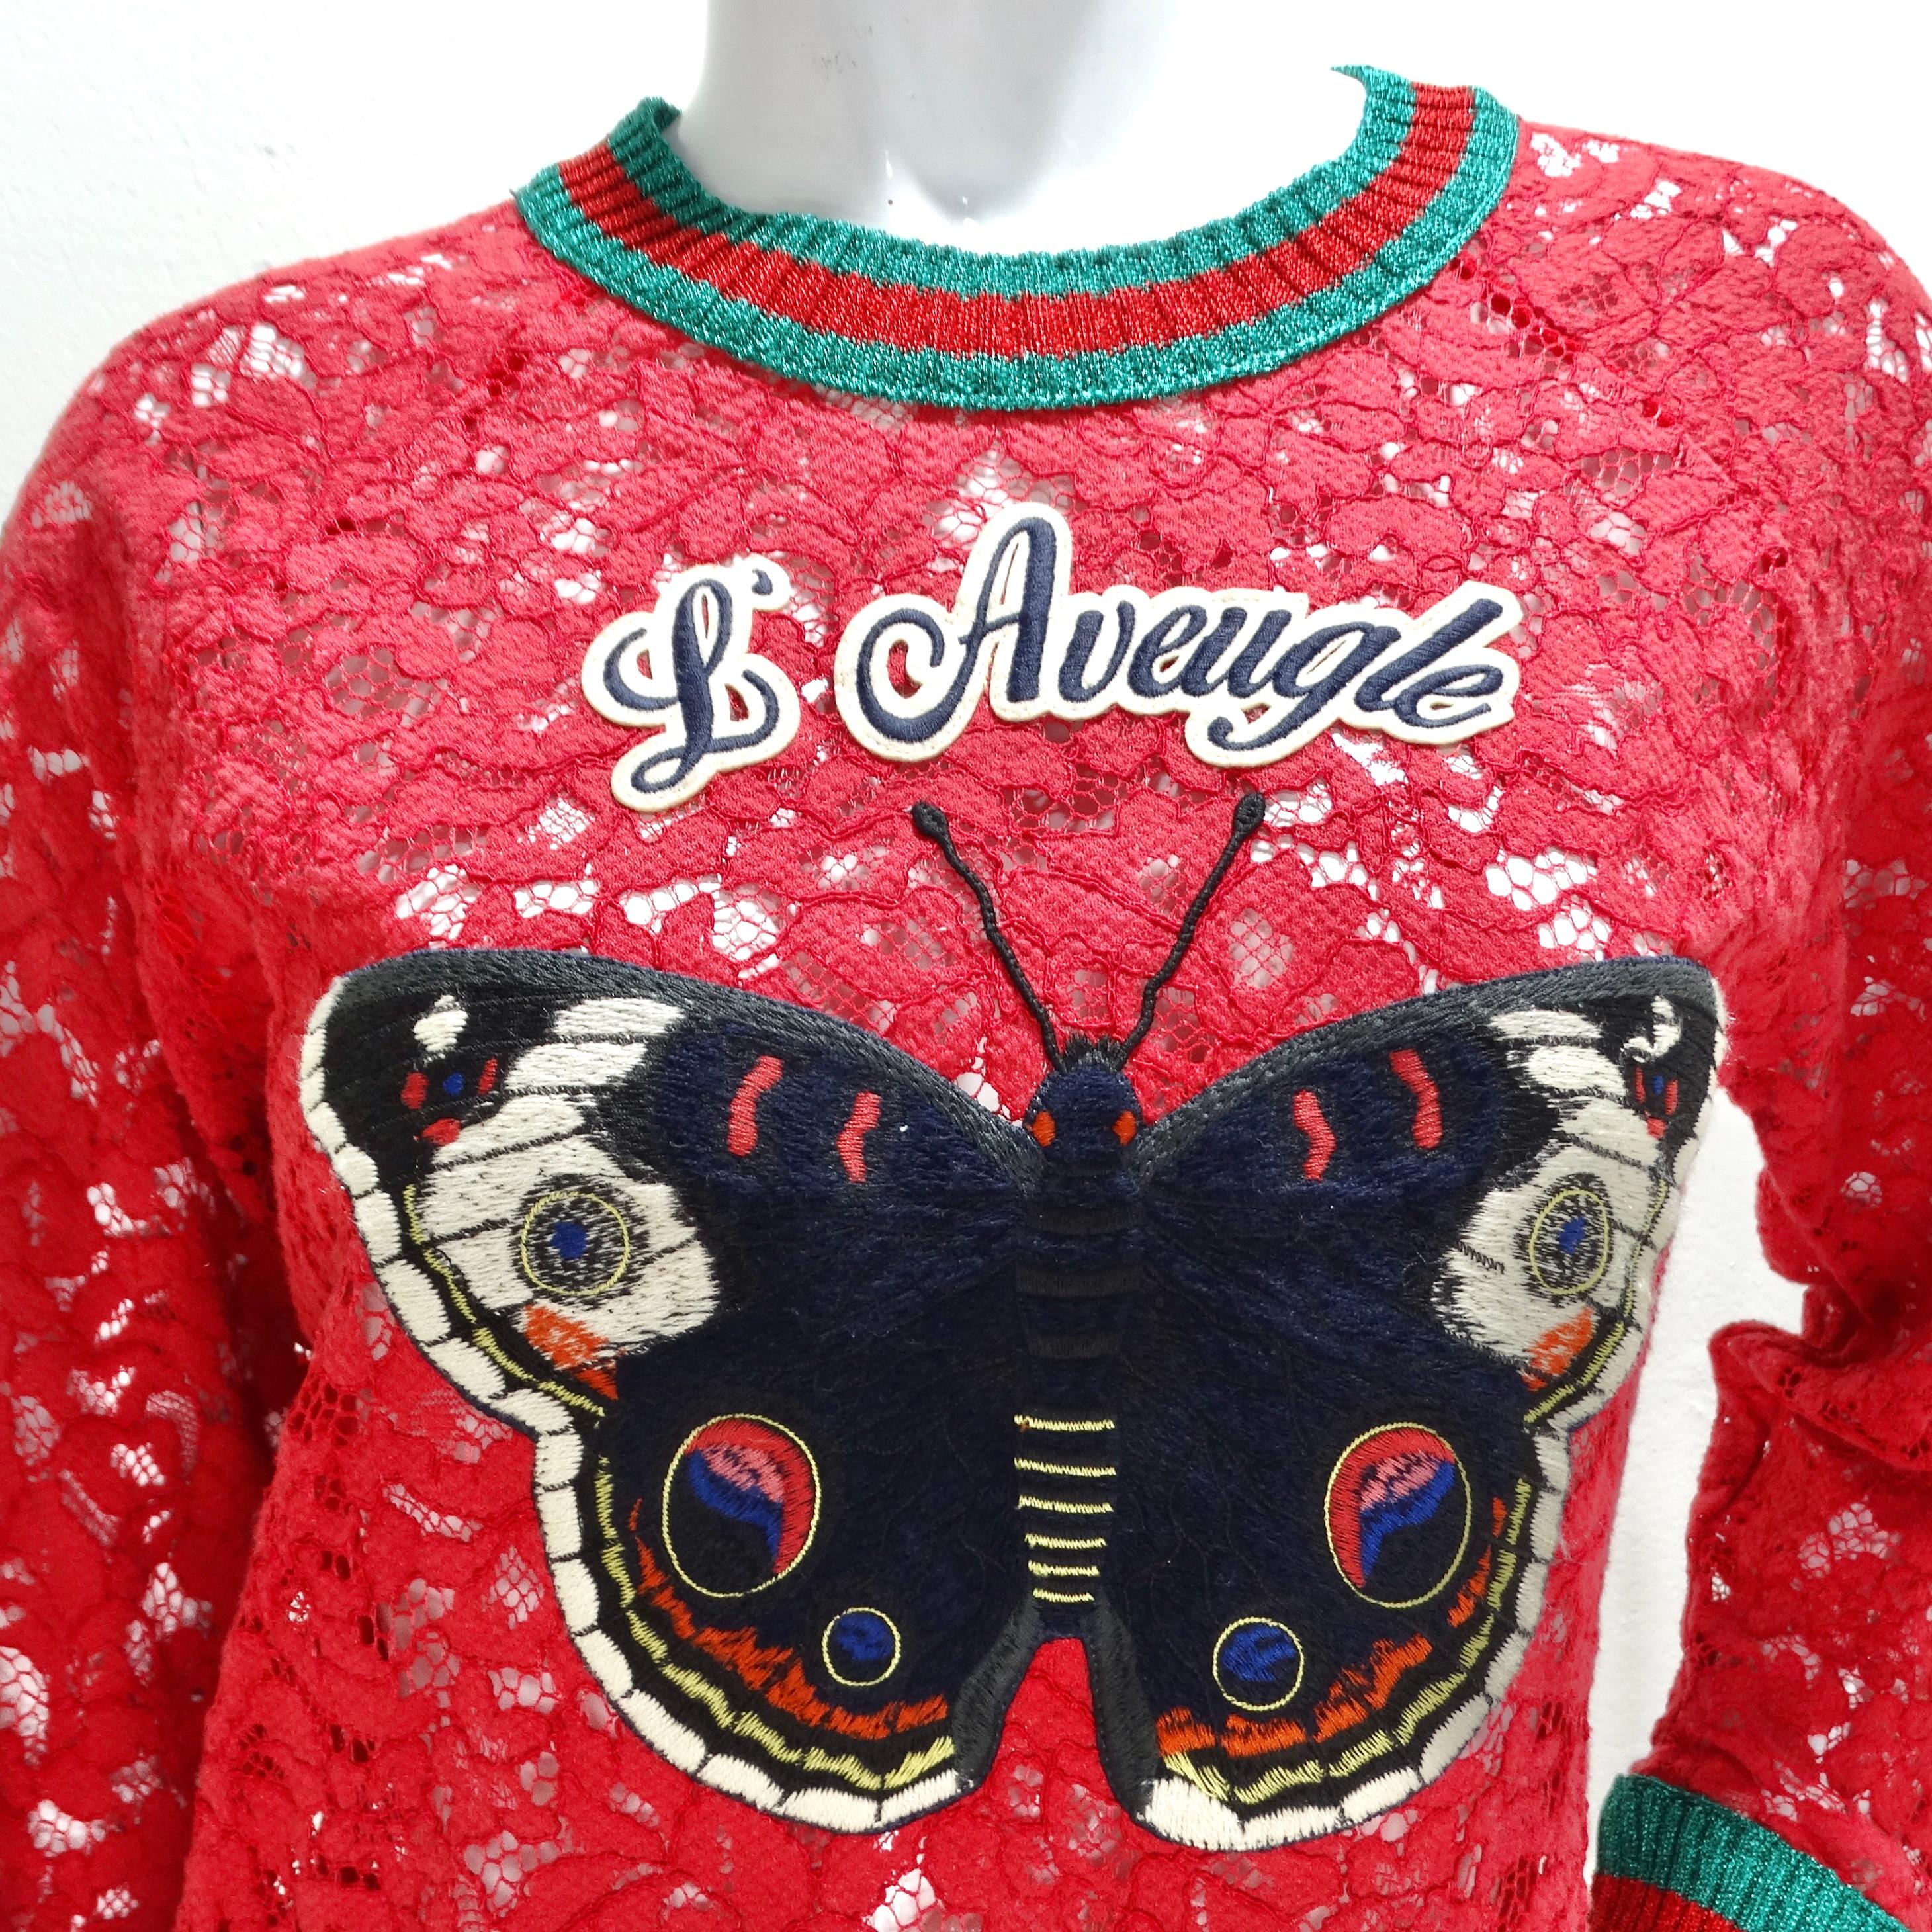 Introducing the Gucci L'Aveugle Par Amour Graphic Print Sweatshirt, a stylish and unique piece that showcases Gucci's signature aesthetic with a contemporary twist. Crafted from red lace, this crewneck sweatshirt features the iconic Gucci red and